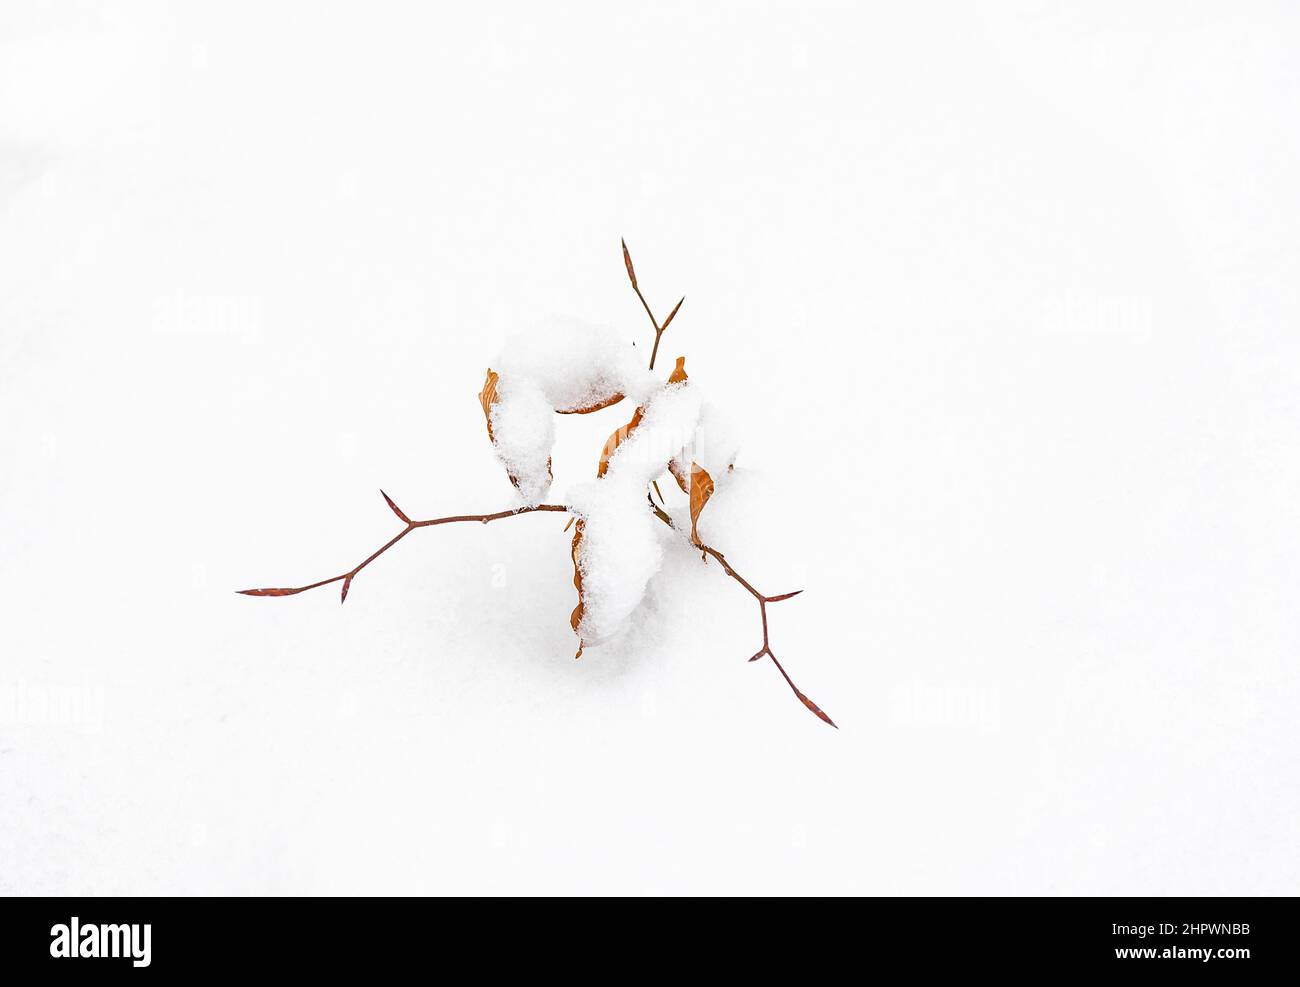 detail of leave in winter isolated on snow Stock Photo